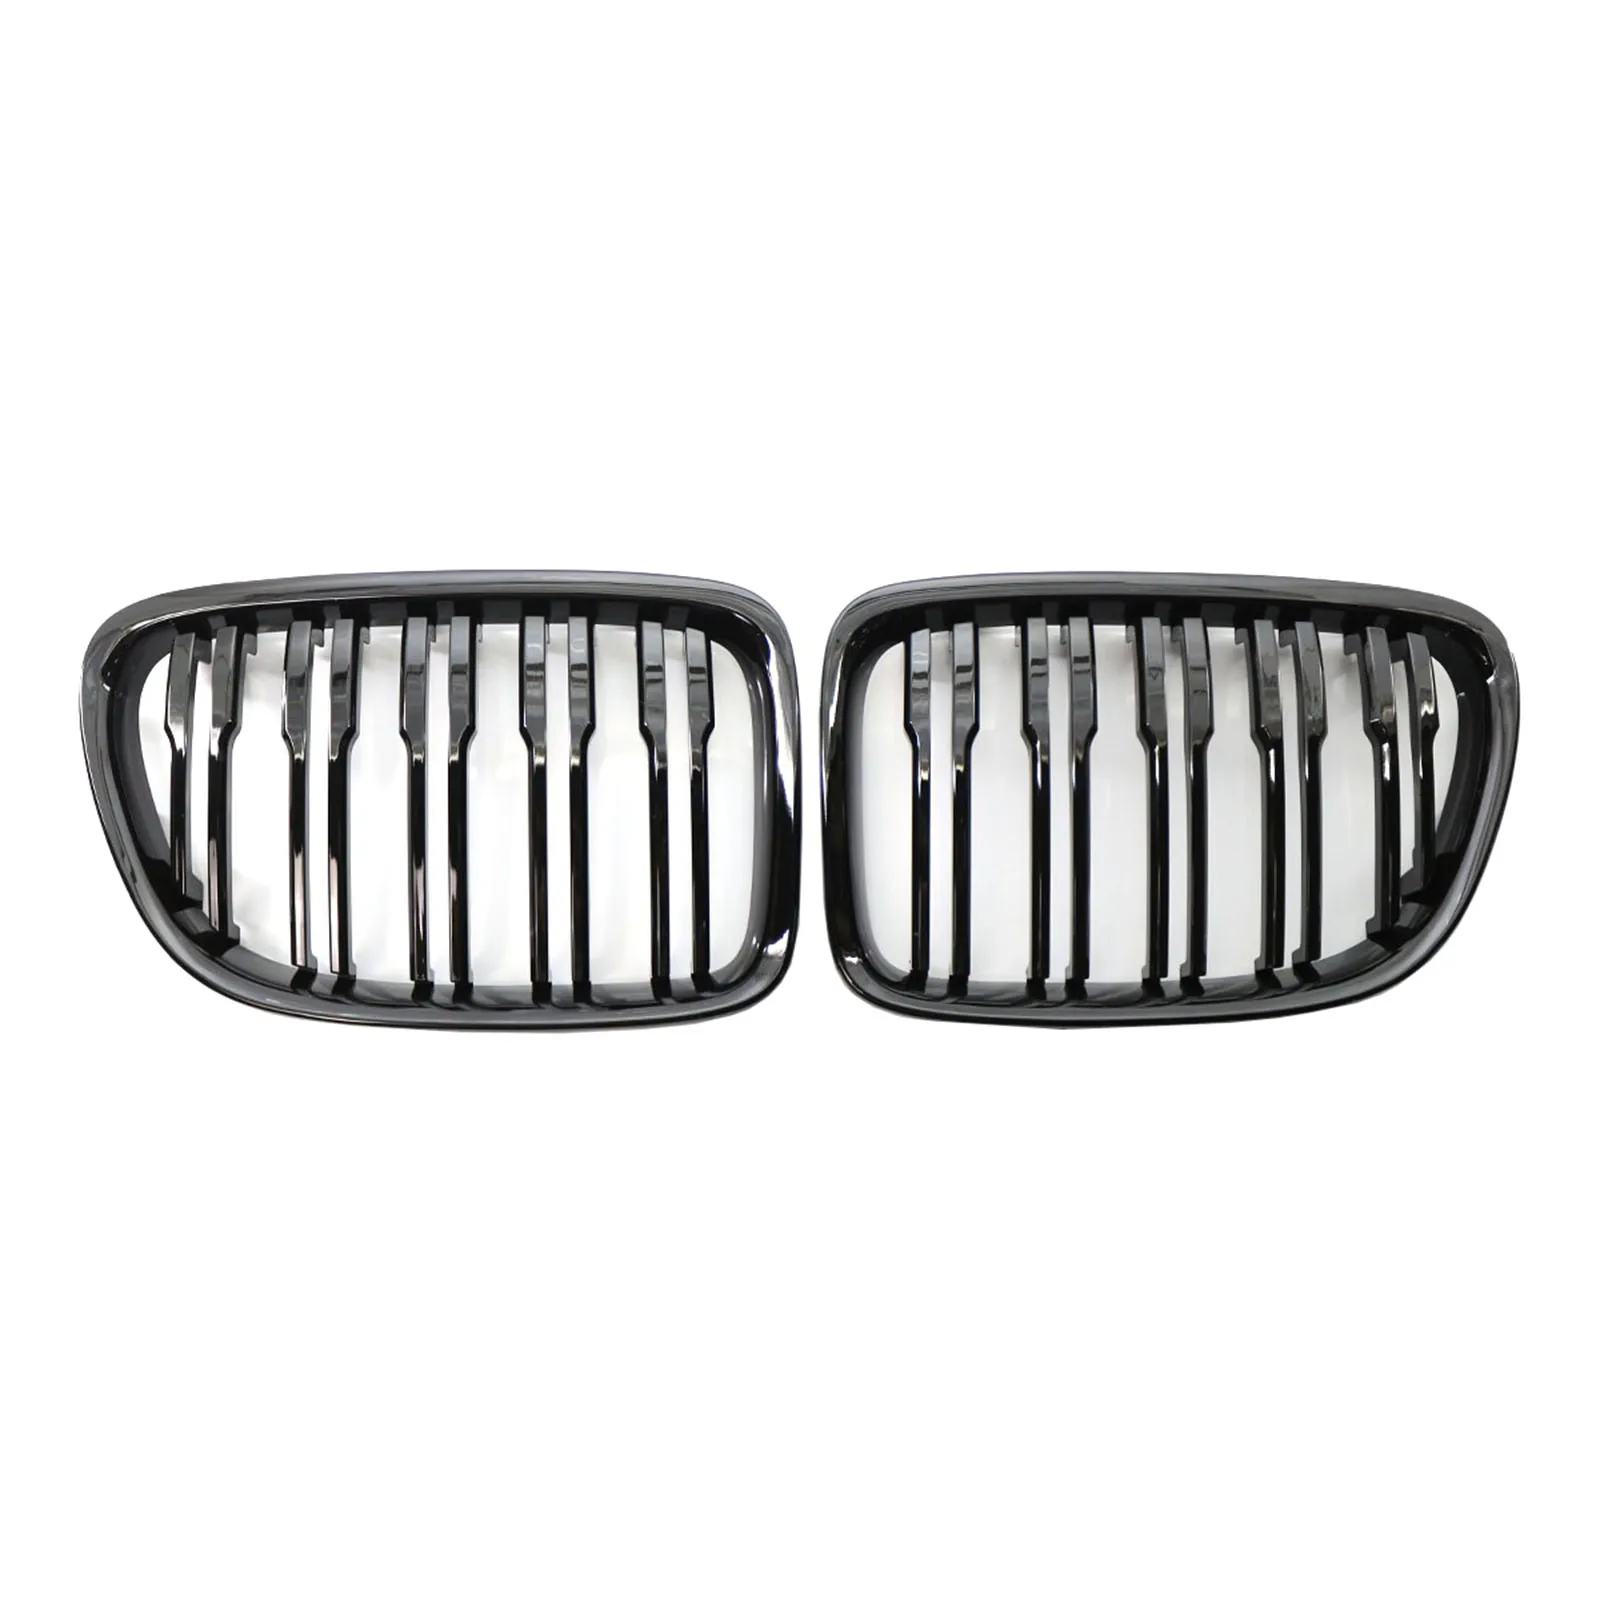 2pcs Front Grille Grill Cover Sport Hood for  X1 E84 11-16 51112993305 51112993308 51117347669 Parts Accessories